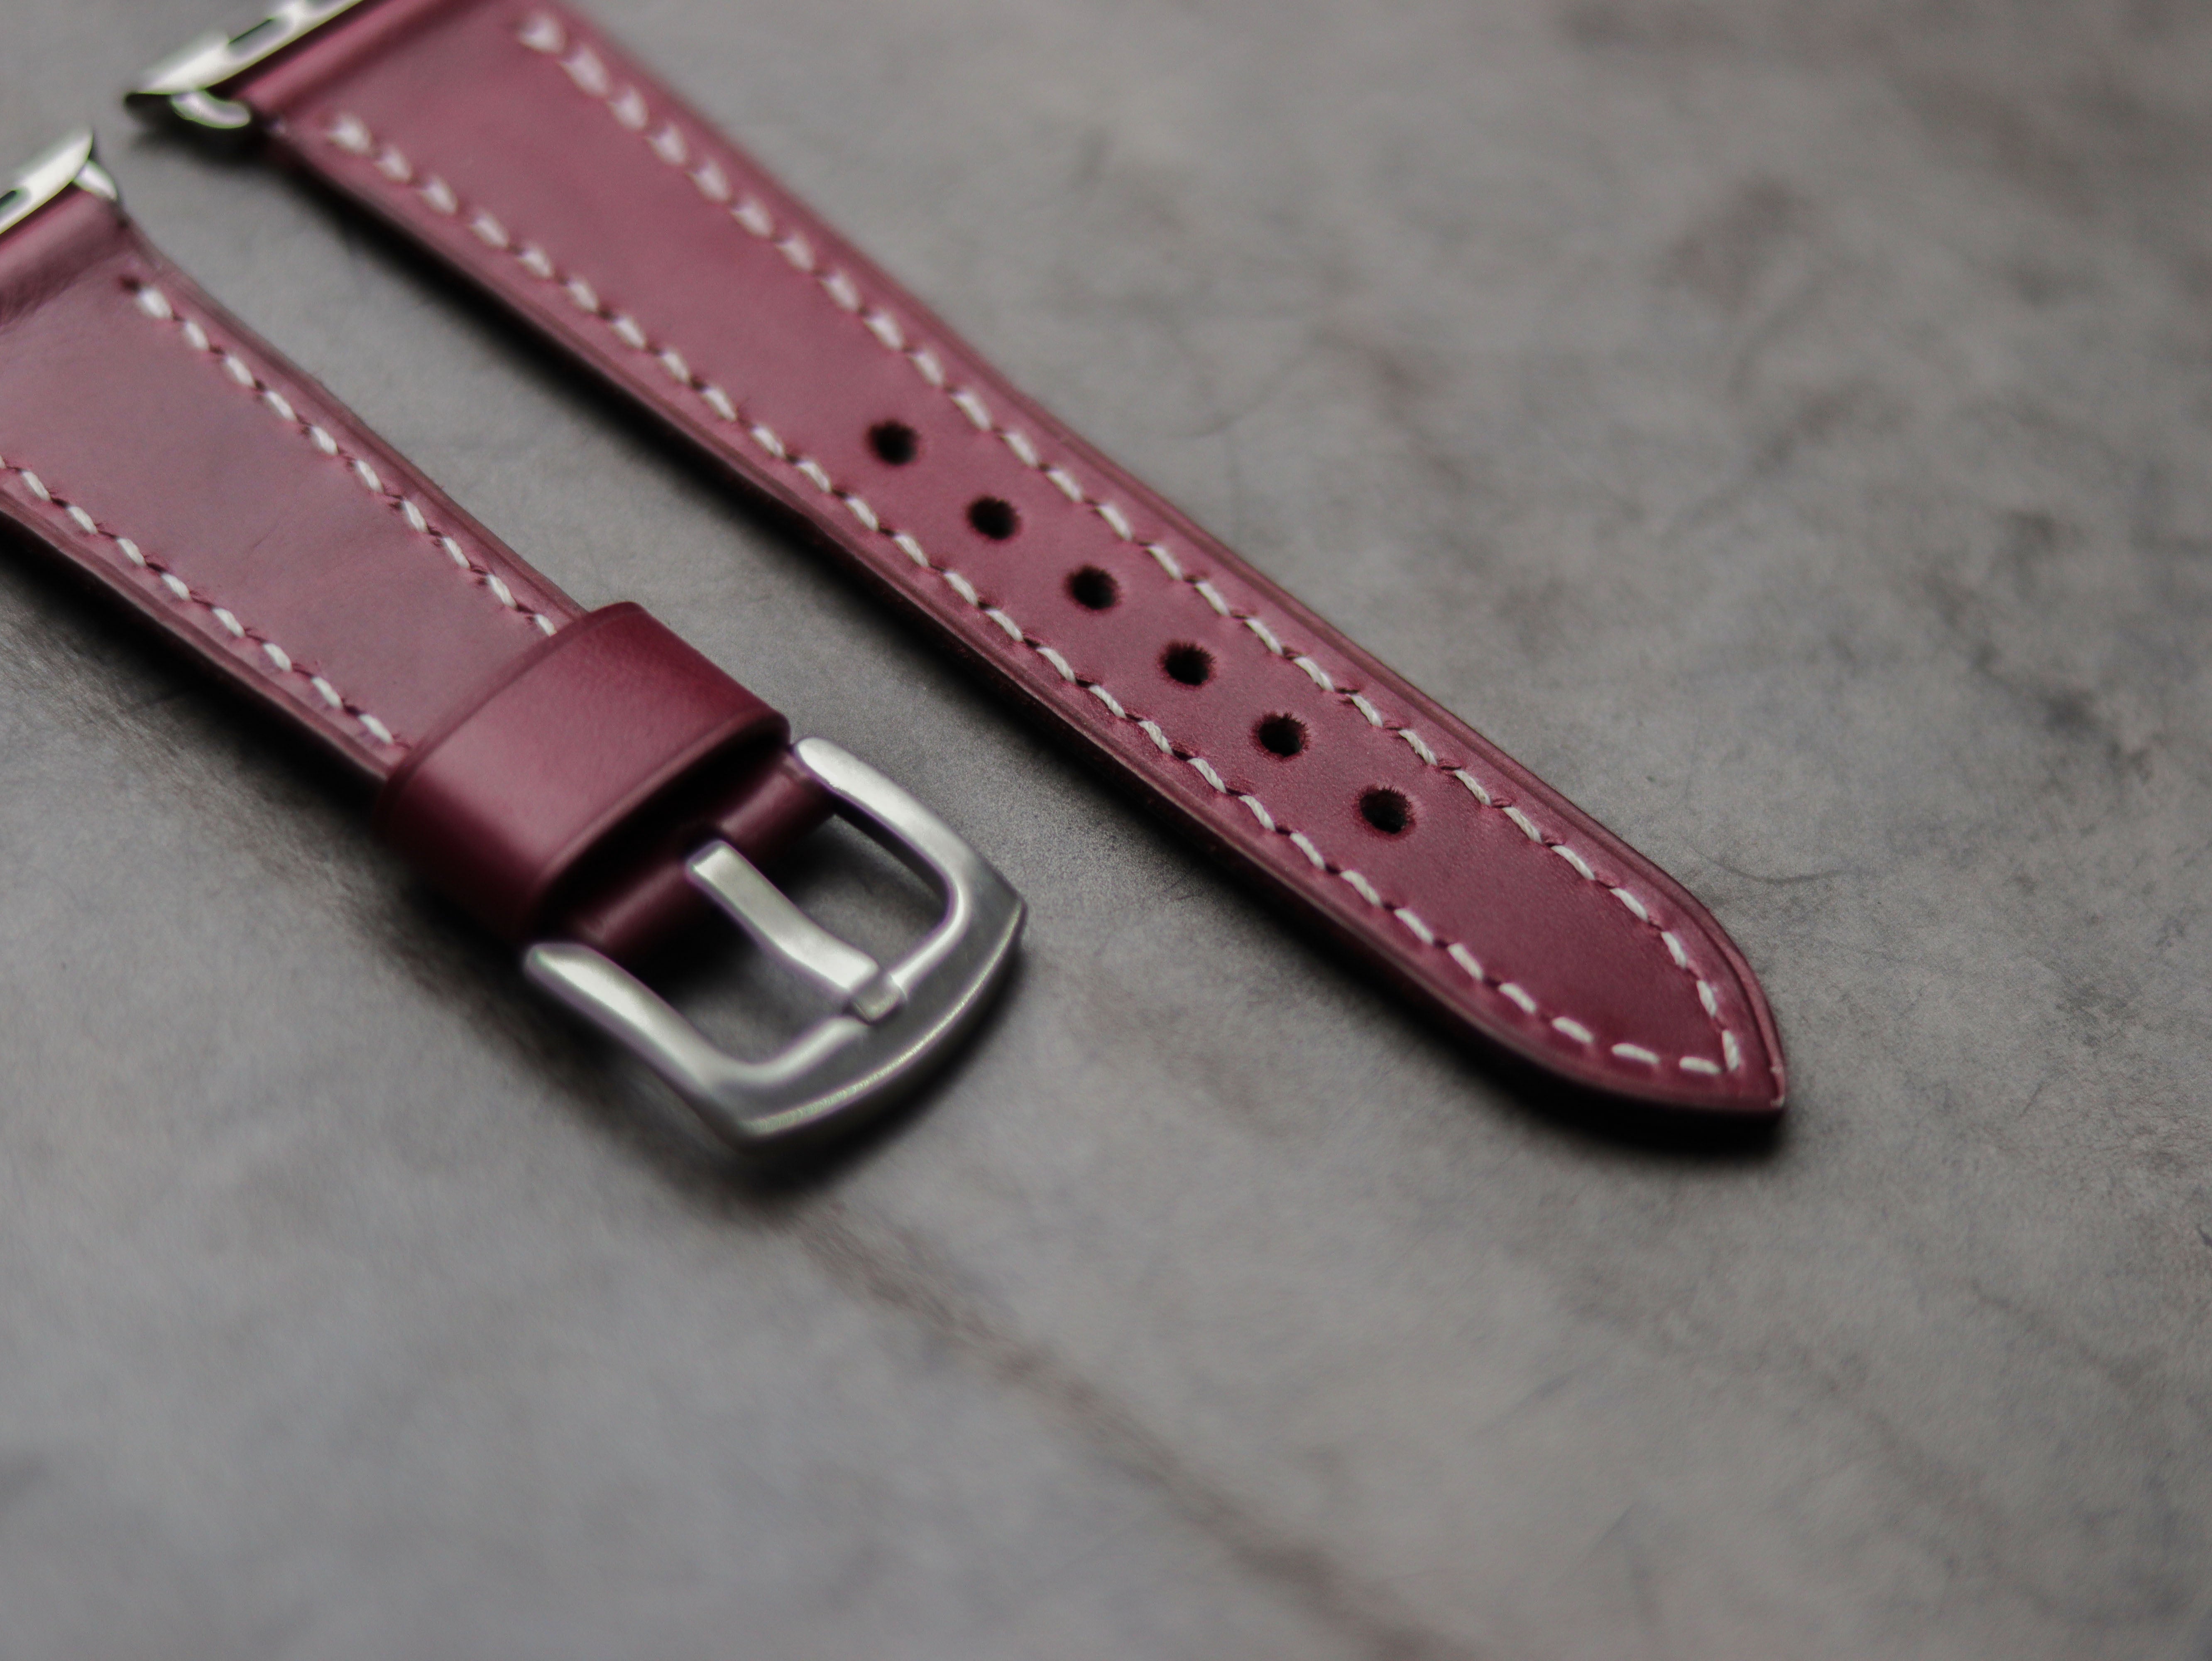 CARMINE BURGUNDY LEATHER - APPLE WATCH STRAPS HAND-CRAFTED